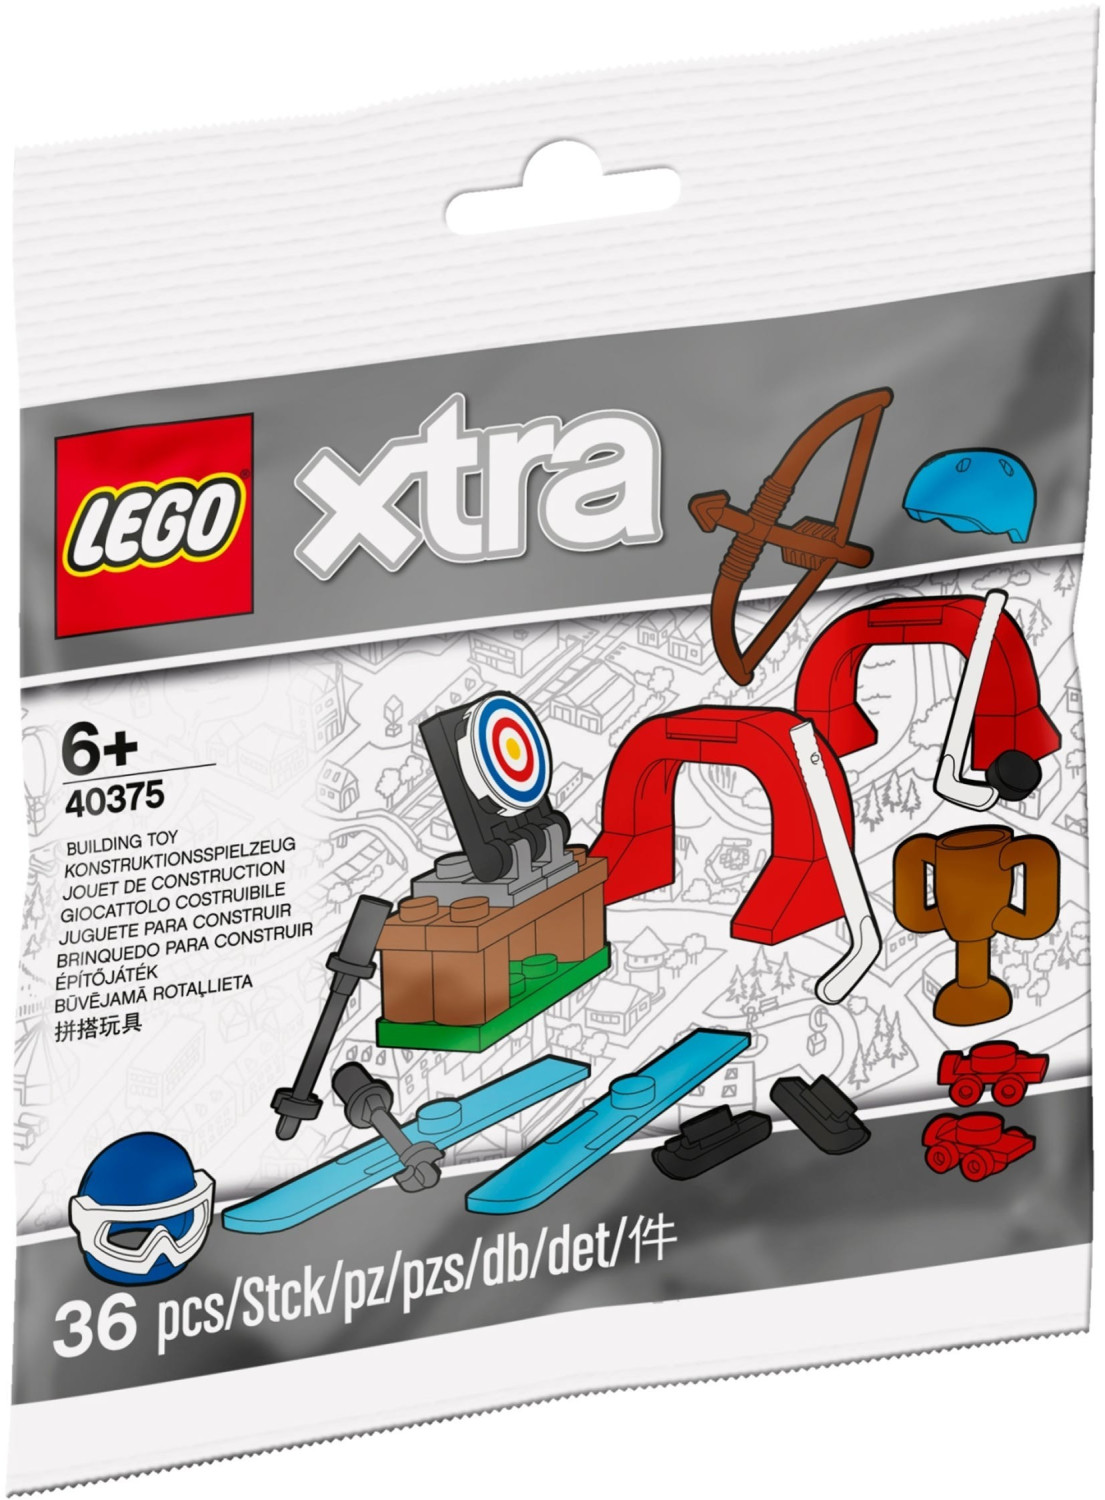 Photos - Construction Toy Lego xtra - Sports Accessories  (40375)